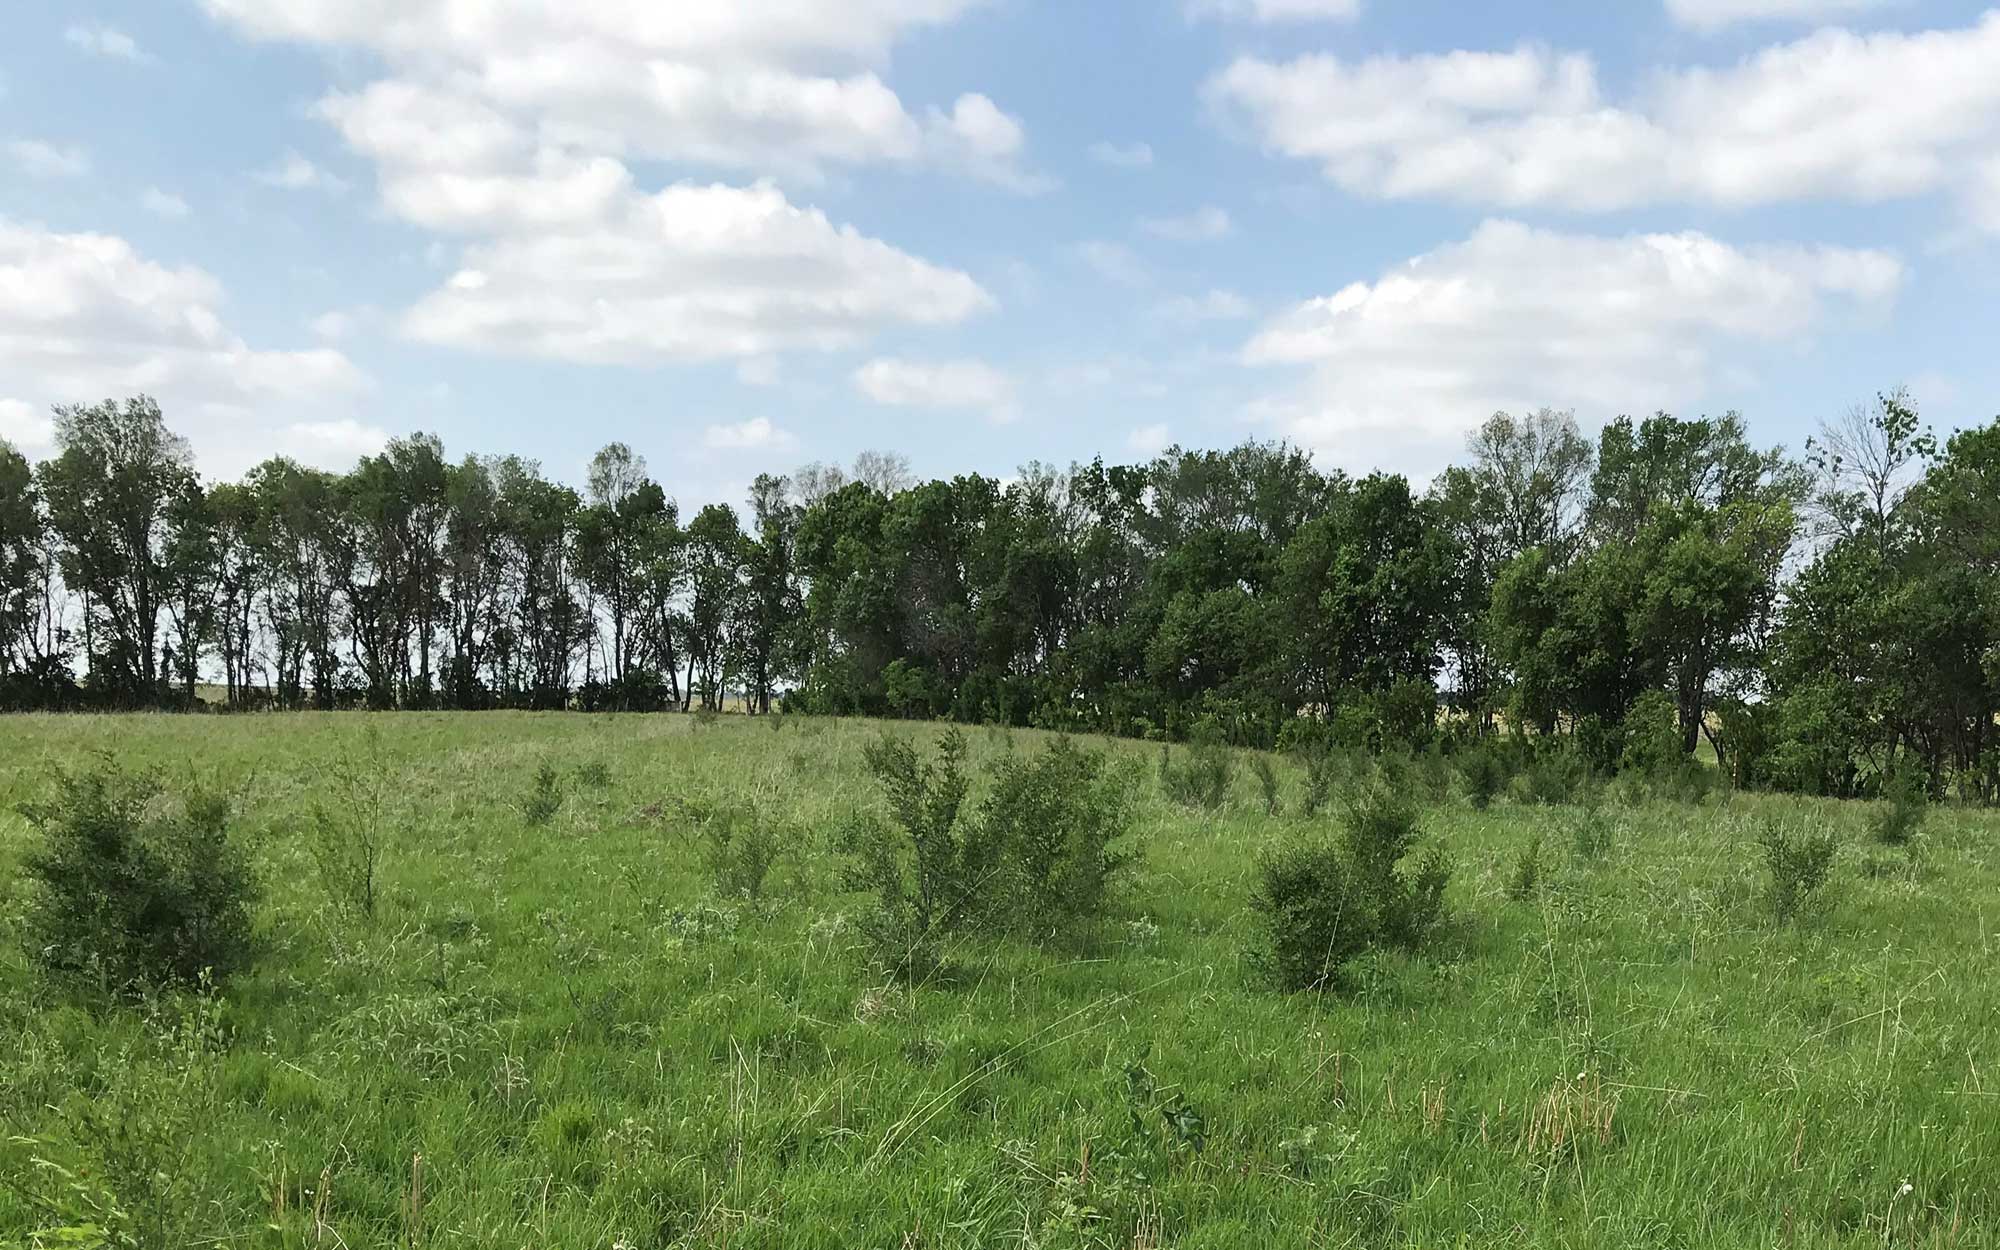 A shlterbelt near a grassland with several volunteer trees growing in it.